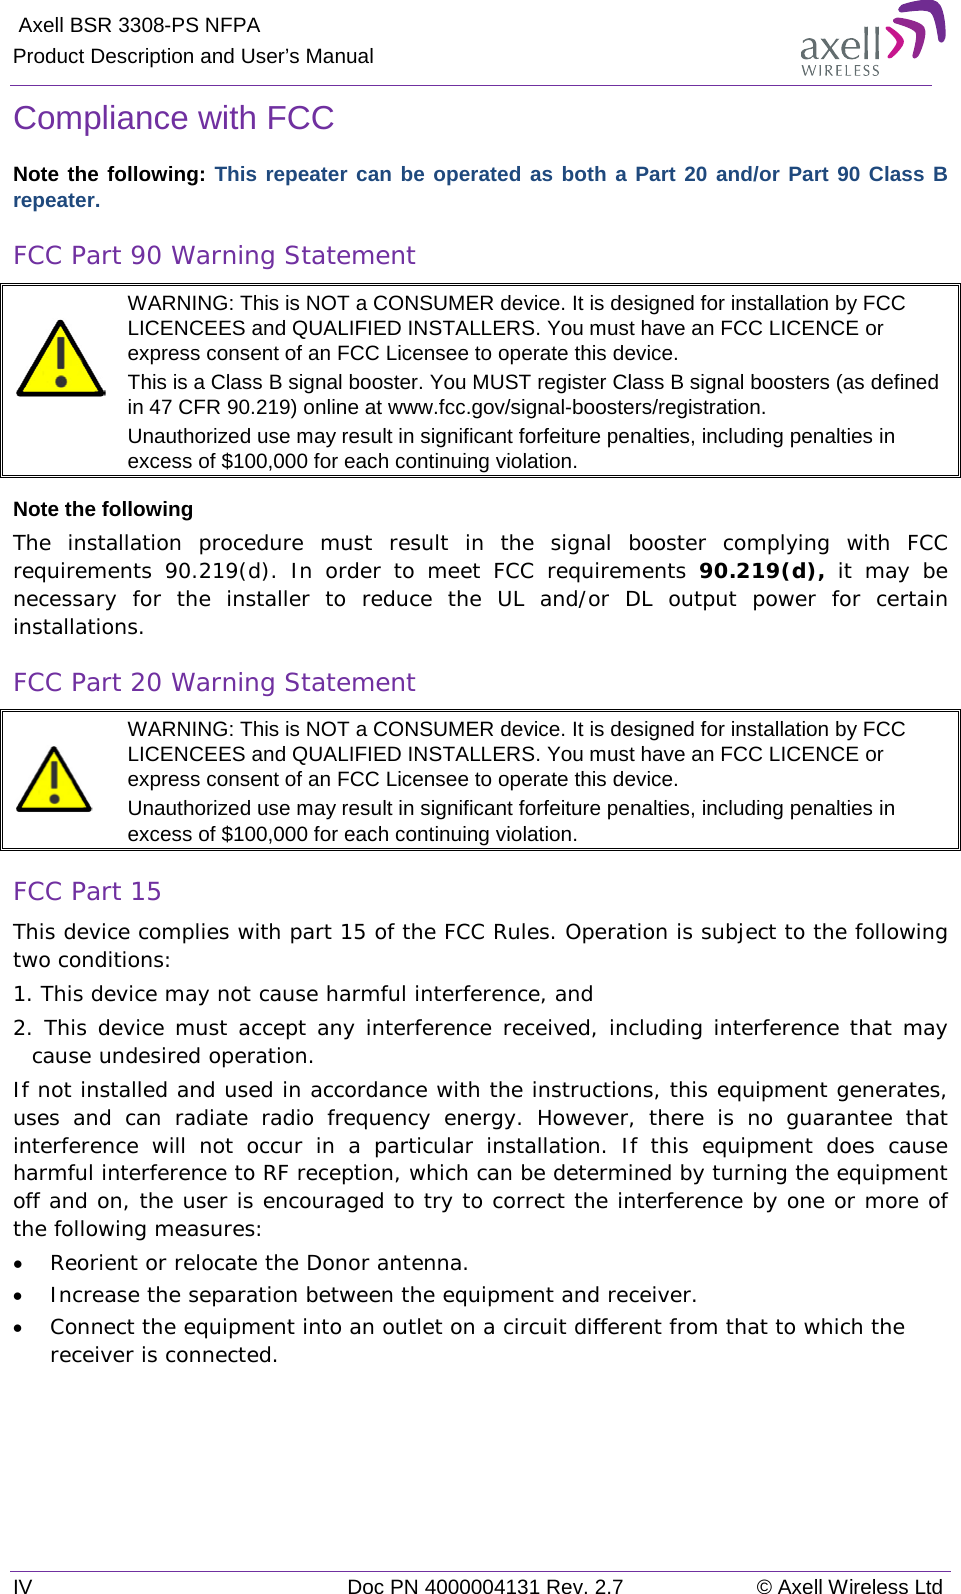  Axell BSR 3308-PS NFPA Product Description and User’s Manual IV Doc PN 4000004131 Rev. 2.7 © Axell Wireless Ltd  Compliance with FCC Note the following: This repeater can be operated as both a Part 20 and/or Part 90 Class B repeater. FCC Part 90 Warning Statement   WARNING: This is NOT a CONSUMER device. It is designed for installation by FCC LICENCEES and QUALIFIED INSTALLERS. You must have an FCC LICENCE or express consent of an FCC Licensee to operate this device.  This is a Class B signal booster. You MUST register Class B signal boosters (as defined in 47 CFR 90.219) online at www.fcc.gov/signal-boosters/registration.  Unauthorized use may result in significant forfeiture penalties, including penalties in excess of $100,000 for each continuing violation. Note the following The installation procedure must result in the signal booster complying with FCC requirements 90.219(d). In order to meet FCC requirements 90.219(d), it may be necessary for the installer to reduce the UL and/or DL output power for certain installations. FCC Part 20 Warning Statement   WARNING: This is NOT a CONSUMER device. It is designed for installation by FCC LICENCEES and QUALIFIED INSTALLERS. You must have an FCC LICENCE or express consent of an FCC Licensee to operate this device.  Unauthorized use may result in significant forfeiture penalties, including penalties in excess of $100,000 for each continuing violation. FCC Part 15 This device complies with part 15 of the FCC Rules. Operation is subject to the following two conditions:  1. This device may not cause harmful interference, and   2. This device must accept any interference received, including interference that may cause undesired operation.  If not installed and used in accordance with the instructions, this equipment generates, uses and can radiate radio frequency energy. However, there is no guarantee that interference will not occur in a particular installation. If this equipment does cause harmful interference to RF reception, which can be determined by turning the equipment off and on, the user is encouraged to try to correct the interference by one or more of the following measures: • Reorient or relocate the Donor antenna. • Increase the separation between the equipment and receiver. • Connect the equipment into an outlet on a circuit different from that to which the receiver is connected.   